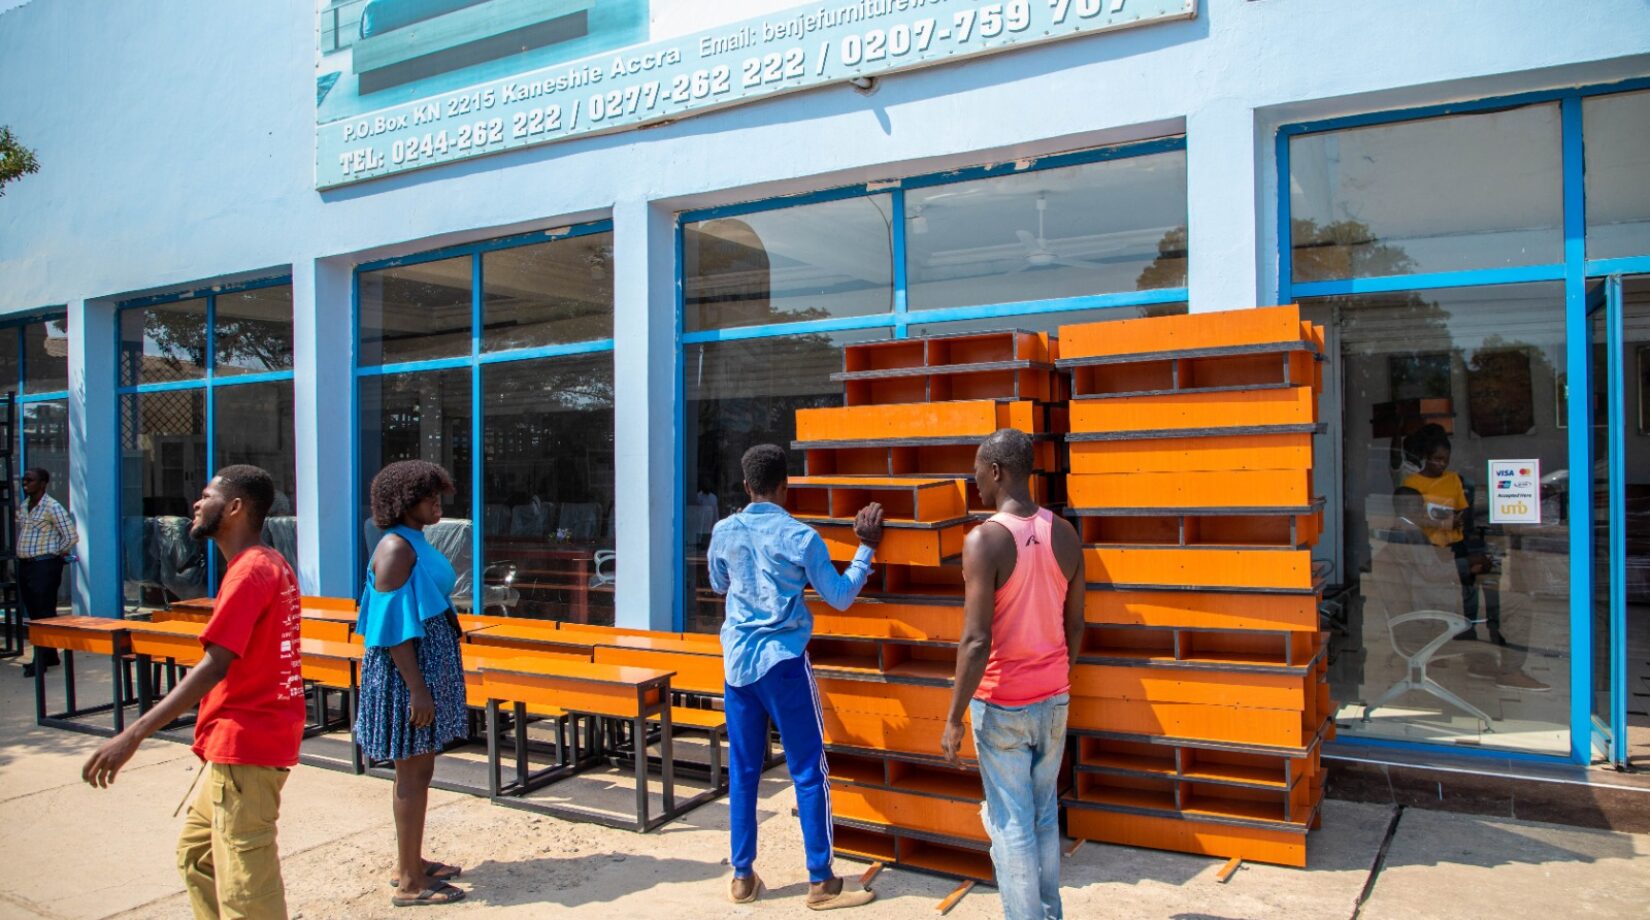 Gov’t distributes over 1.1 million pieces of furniture to pre-tertiary schools since 2017